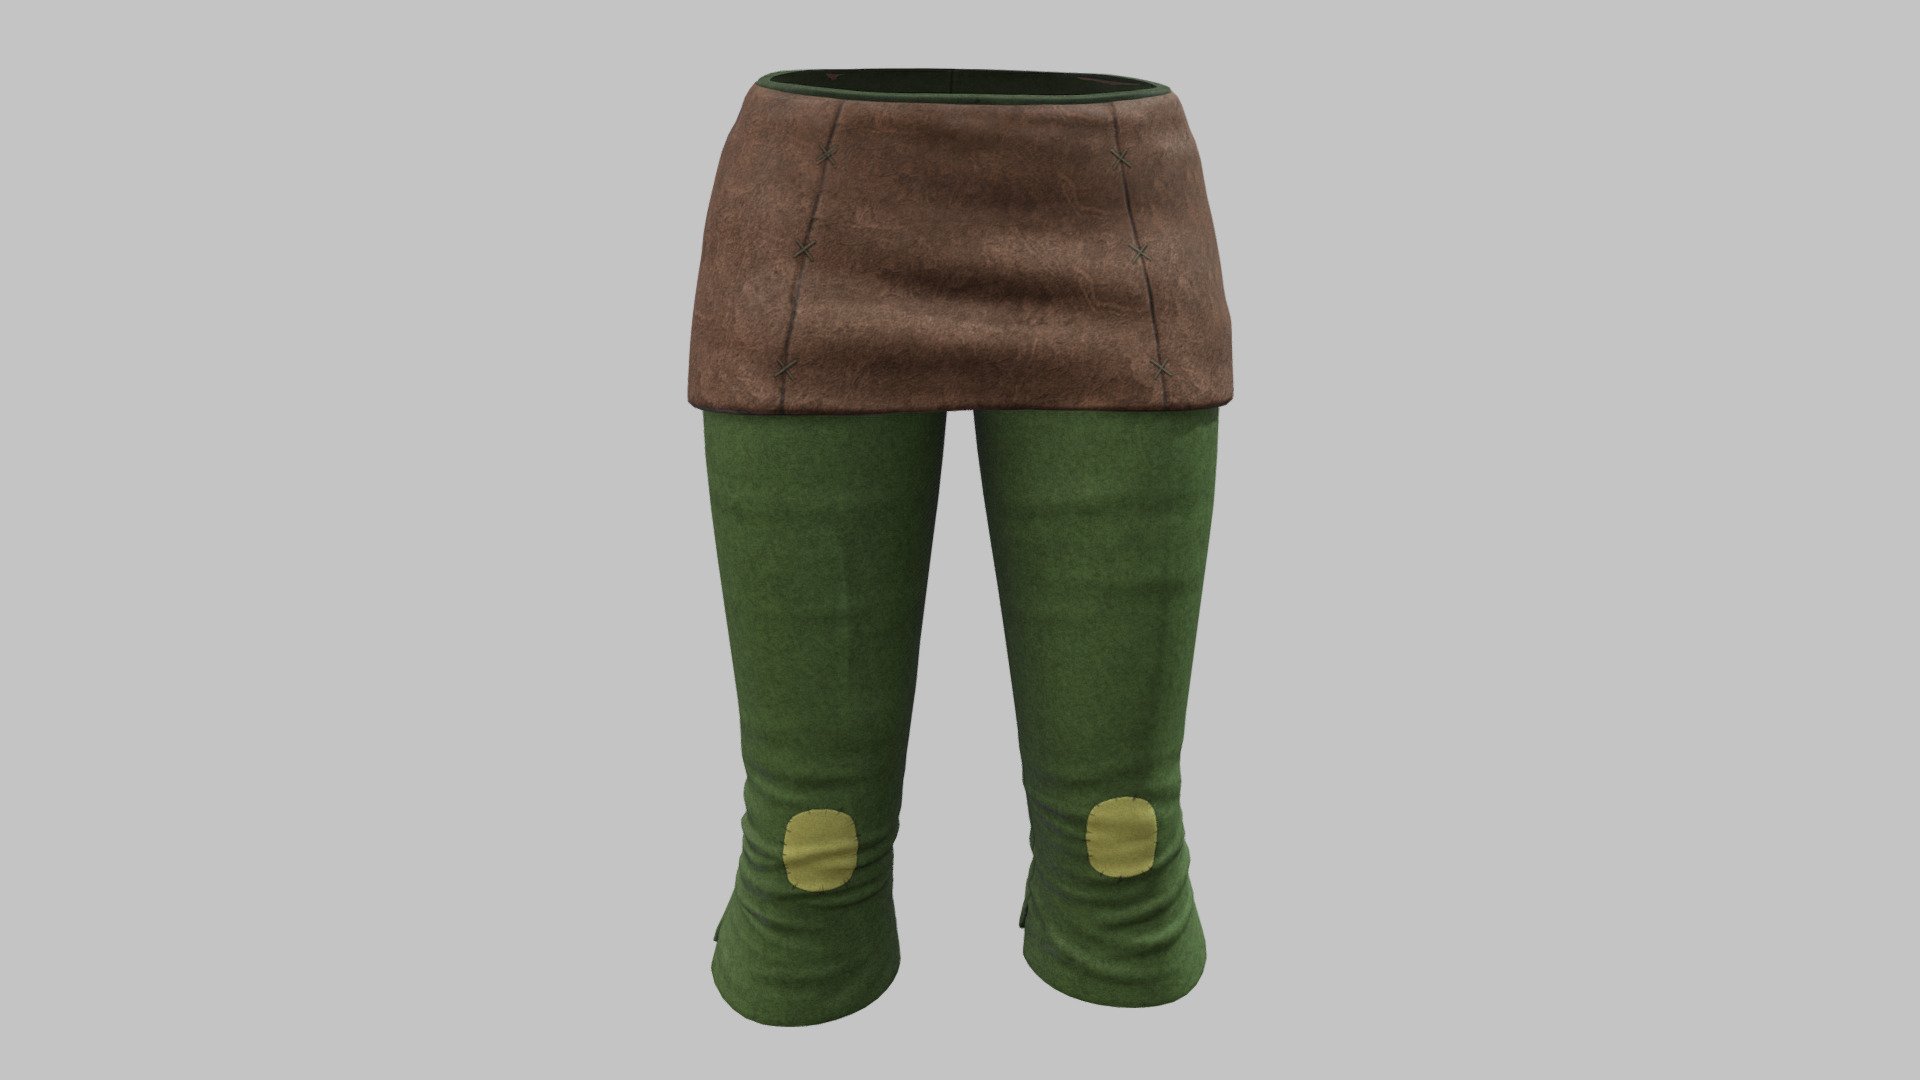 Female Medieval Steampunk Pheasant Pants

Can be fitted to any character

Clean topology

No overlapping smart optimized unwrapped UVs

High-quality realistic textures

FBX, OBJ, gITF, USDZ (request other formats)

PBR or Classic

Type     user:3dia &ldquo;search term